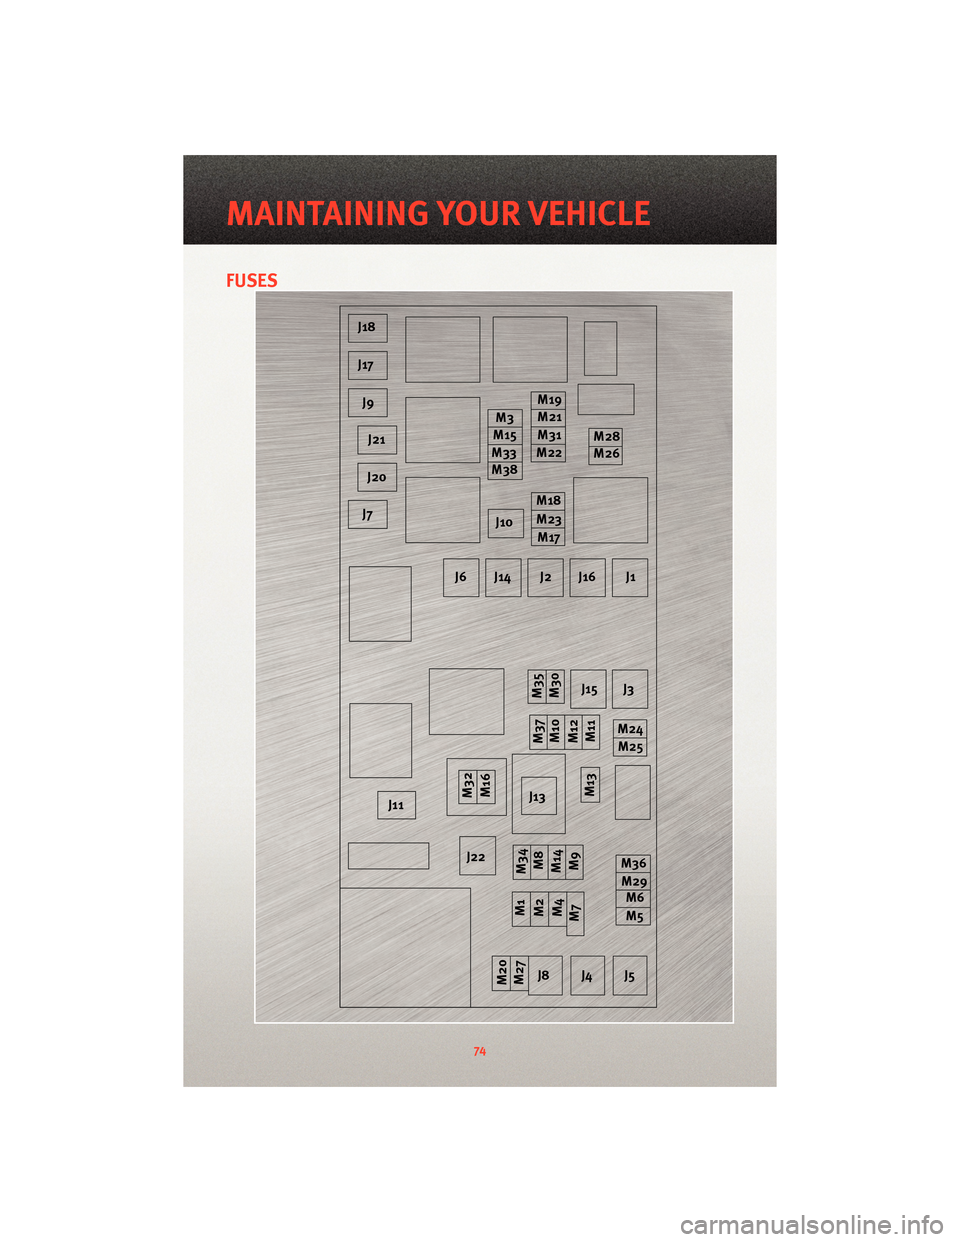 DODGE GRAND CARAVAN 2010 5.G User Guide FUSES
MAINTAINING YOUR VEHICLE
74 